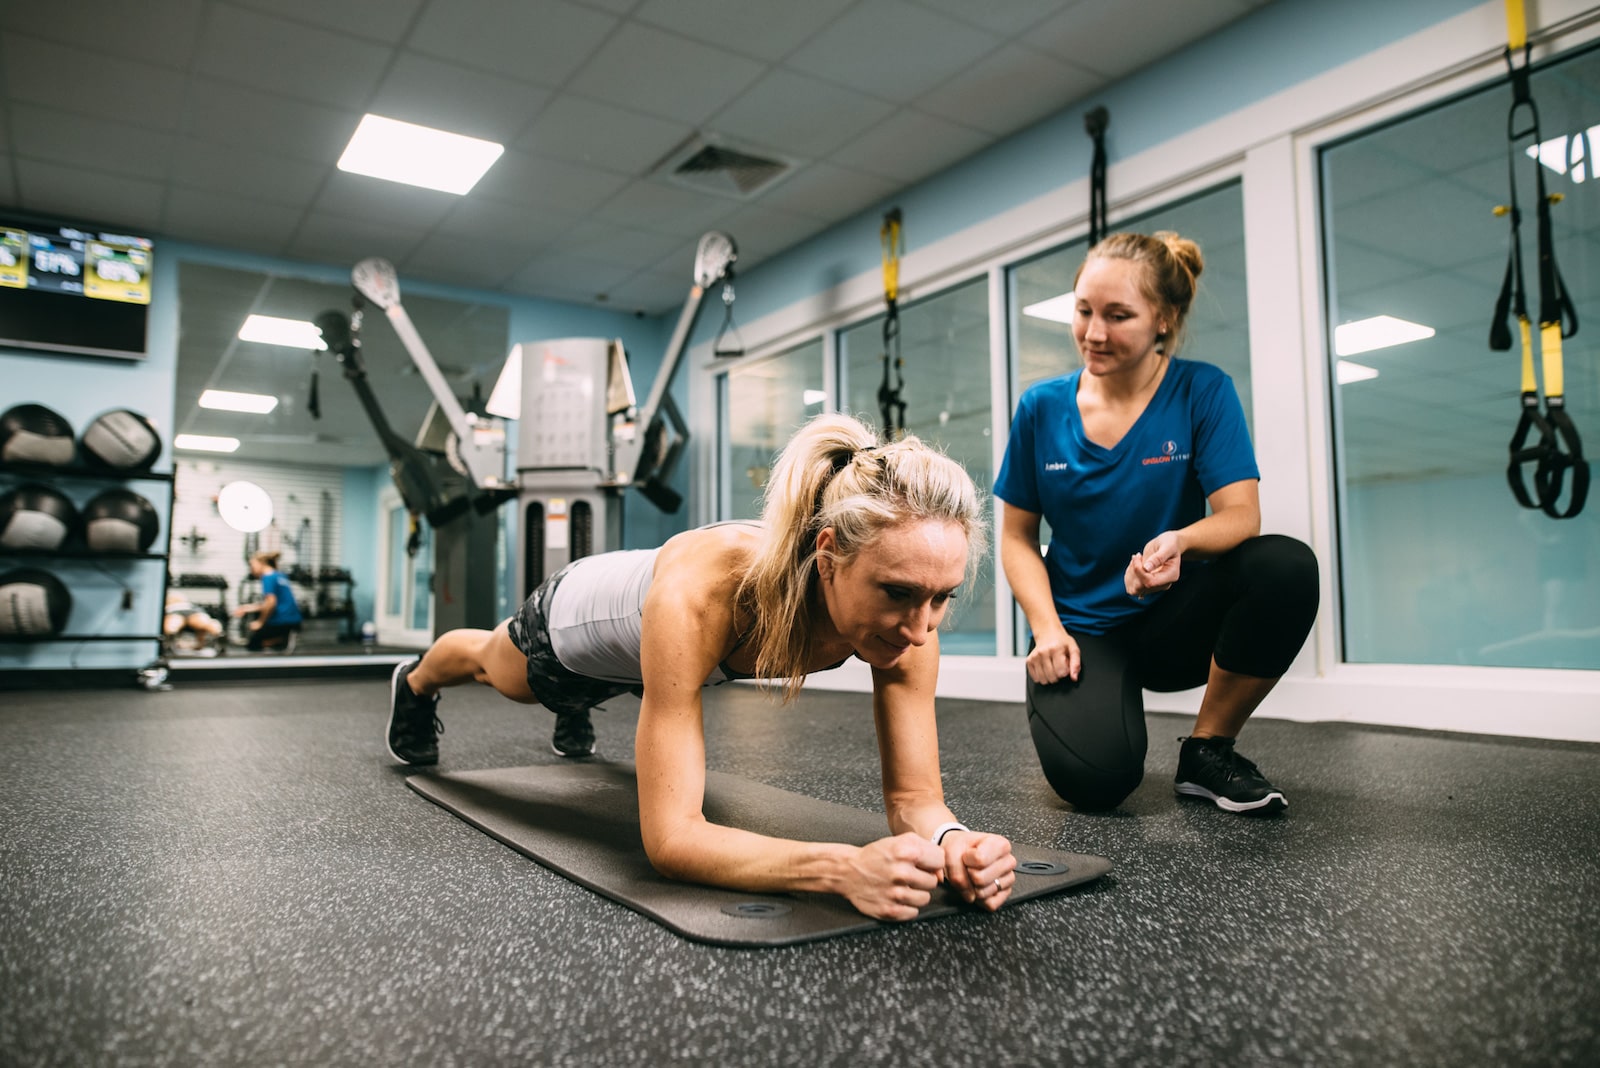 Build strength and stamina with personal training at Onslow Fitness